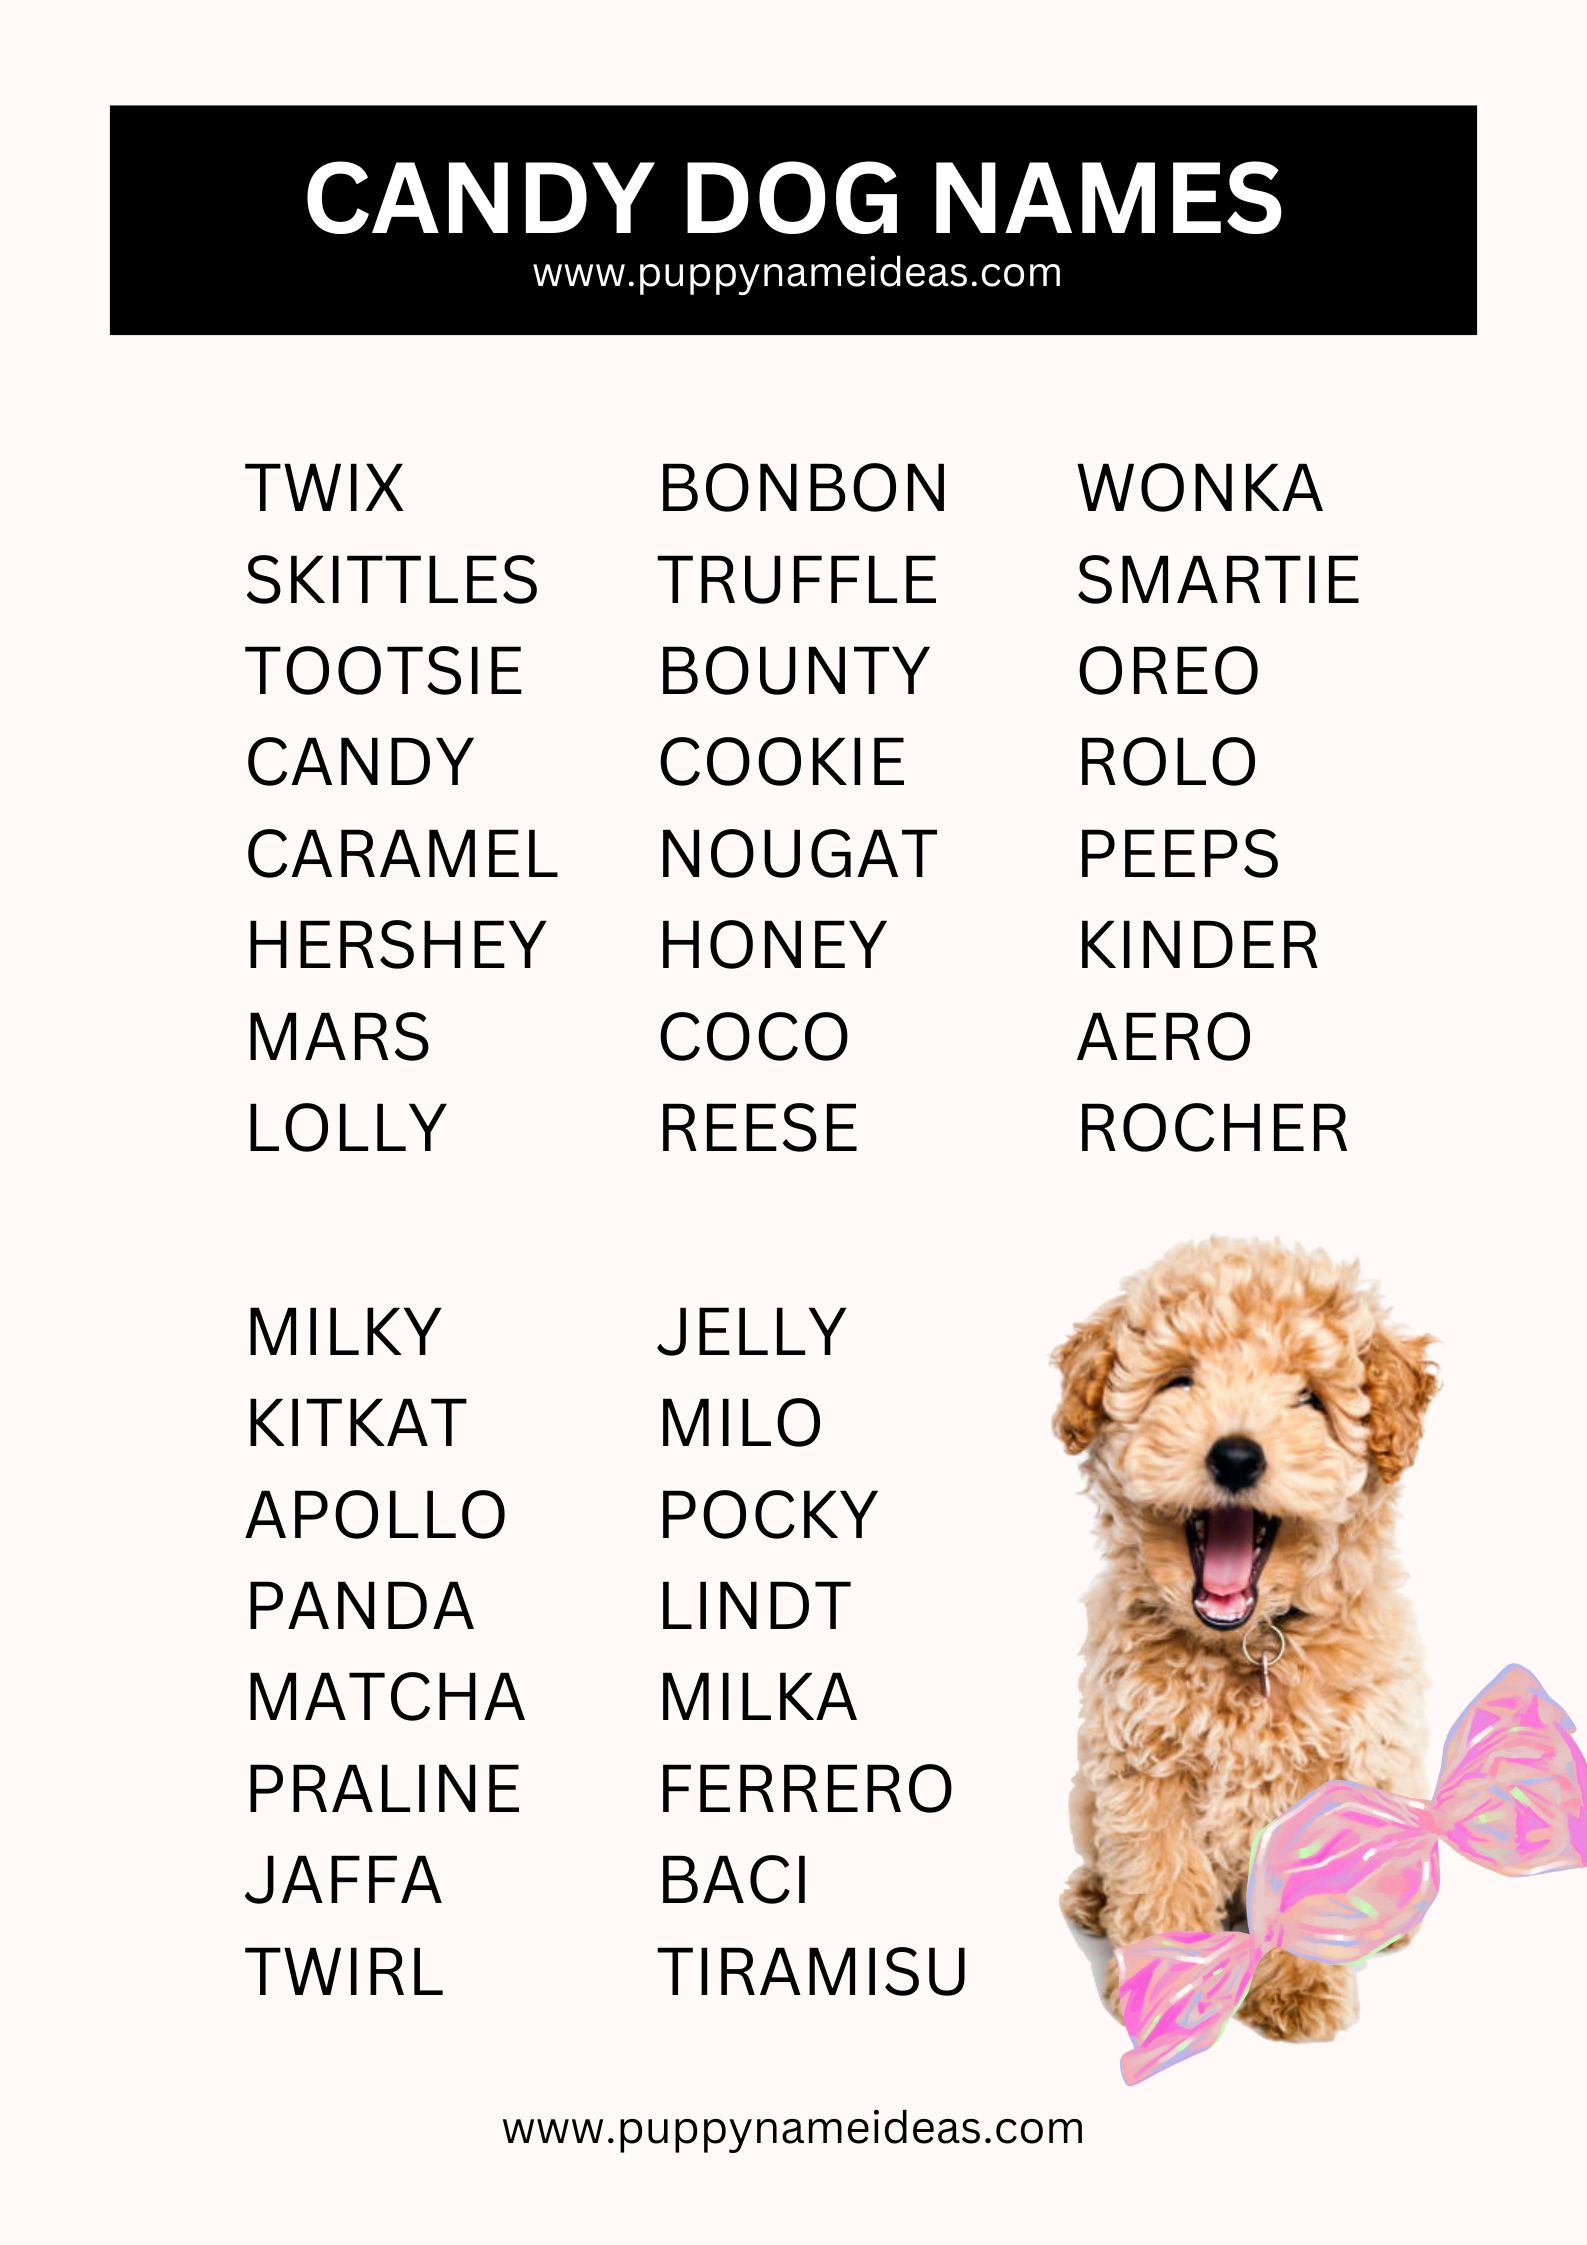 List Of Candy Dog Names